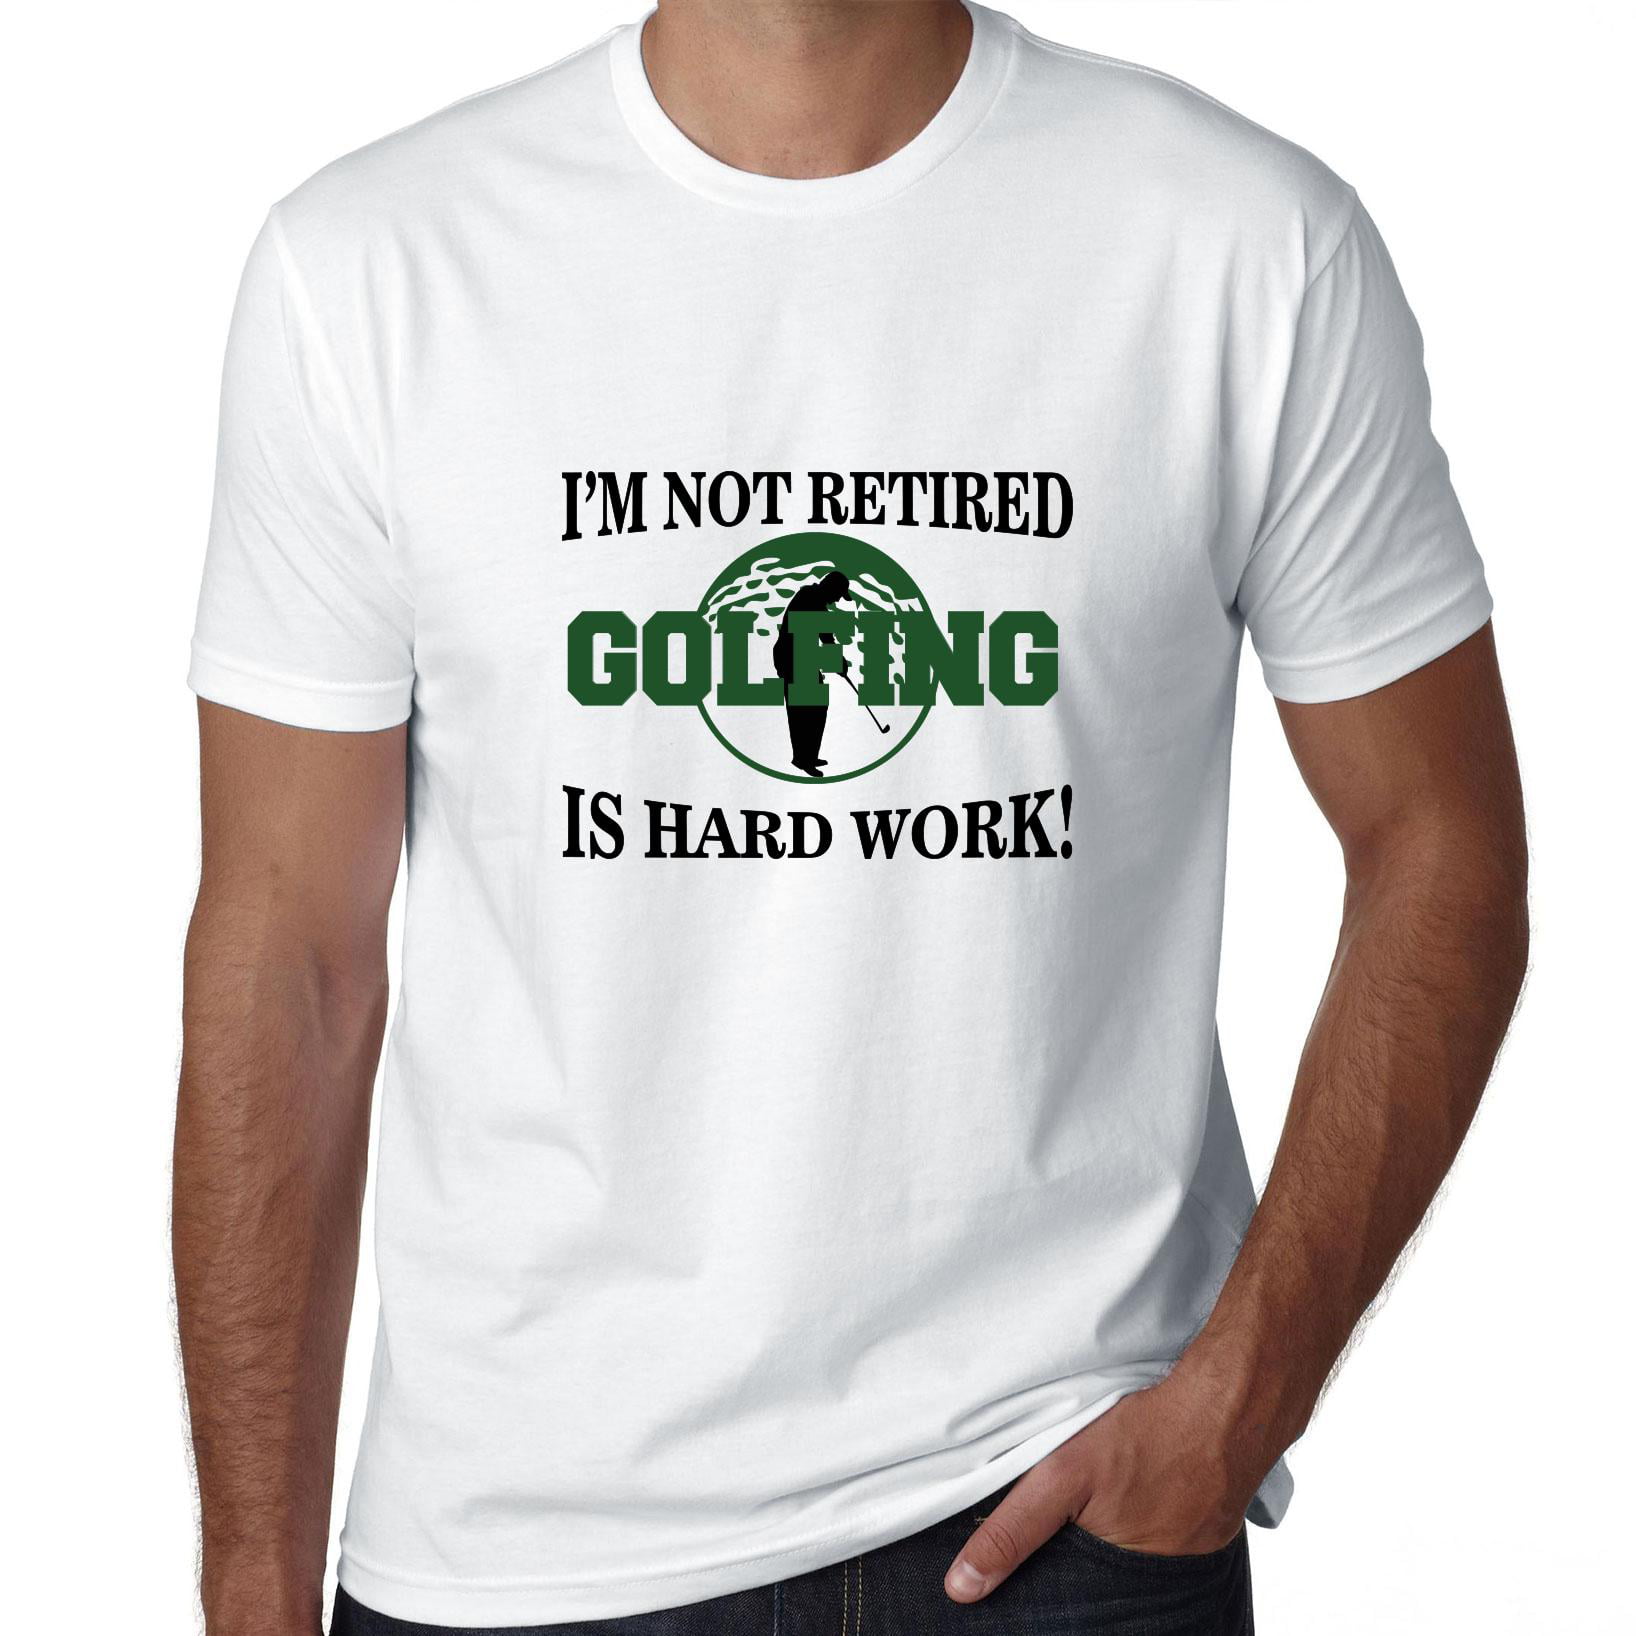 Hollywood Thread - I'm Not Retired - Golfing Is Hard Work! - Funny Love ...